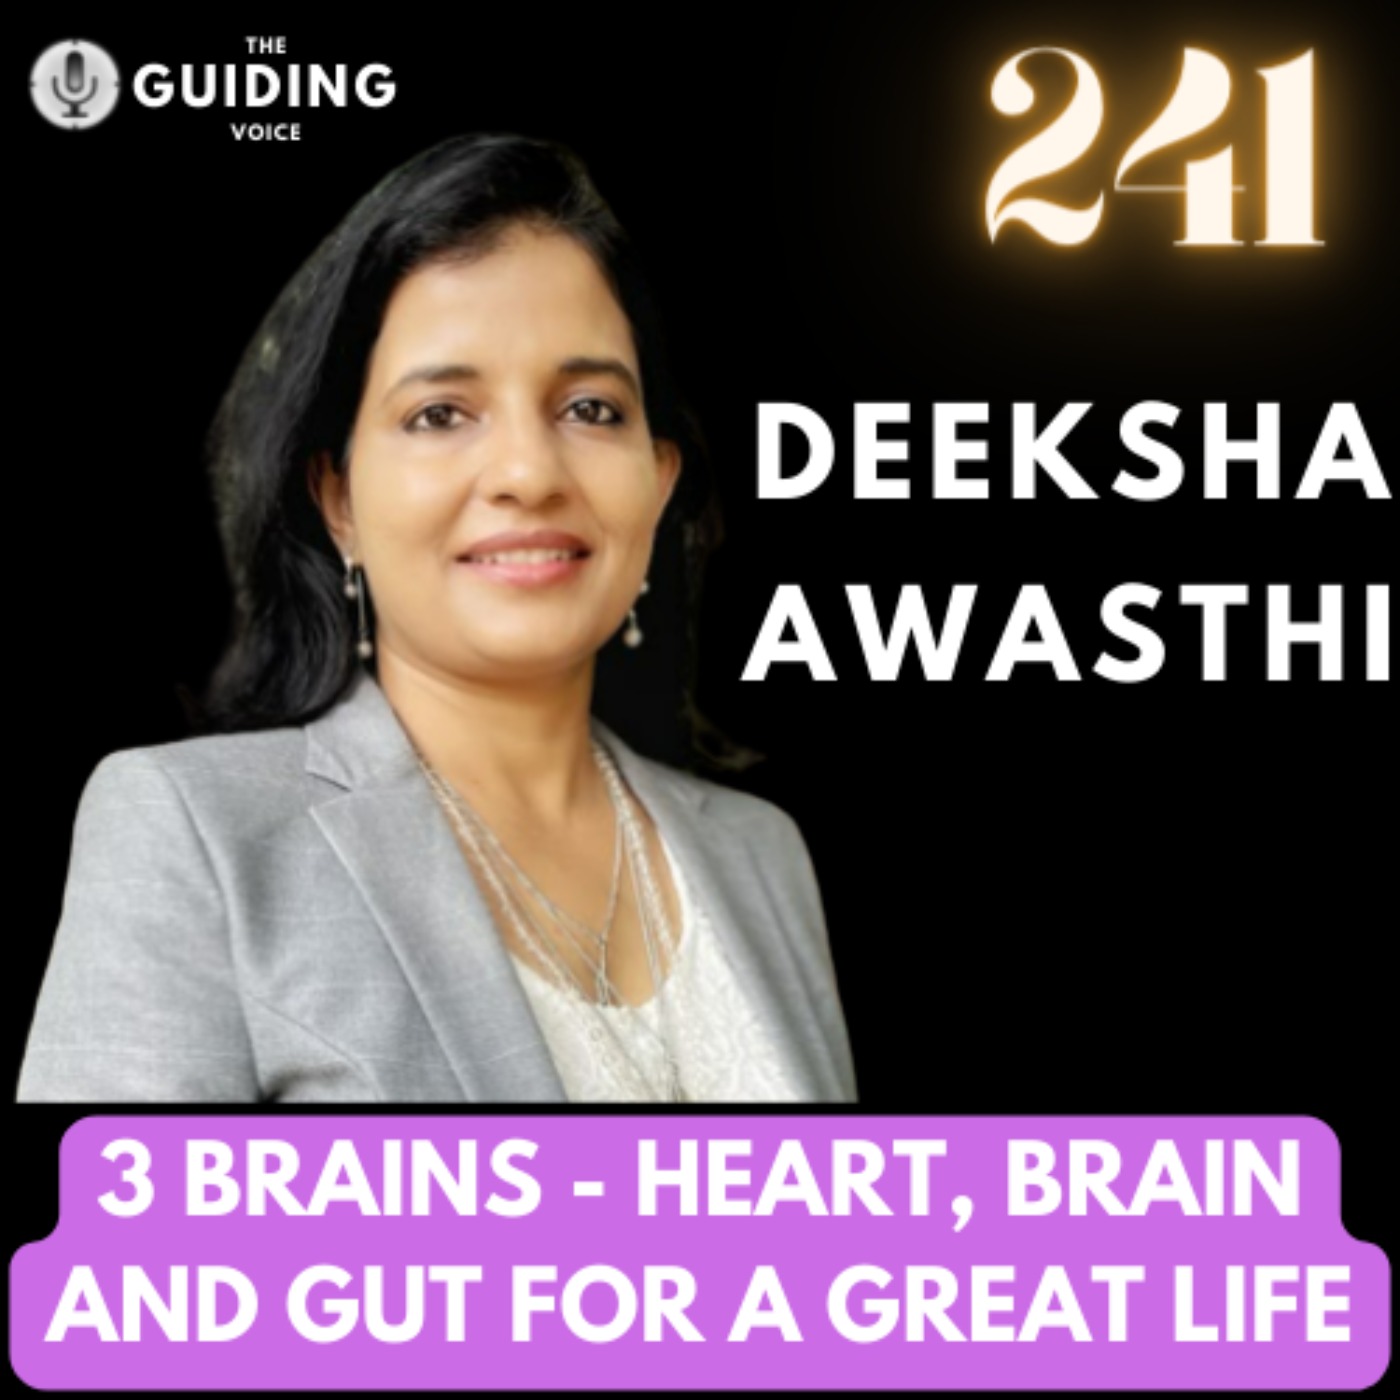 3 BRAINS - HEART, BRAIN AND GUT FOR A GREAT LIFE